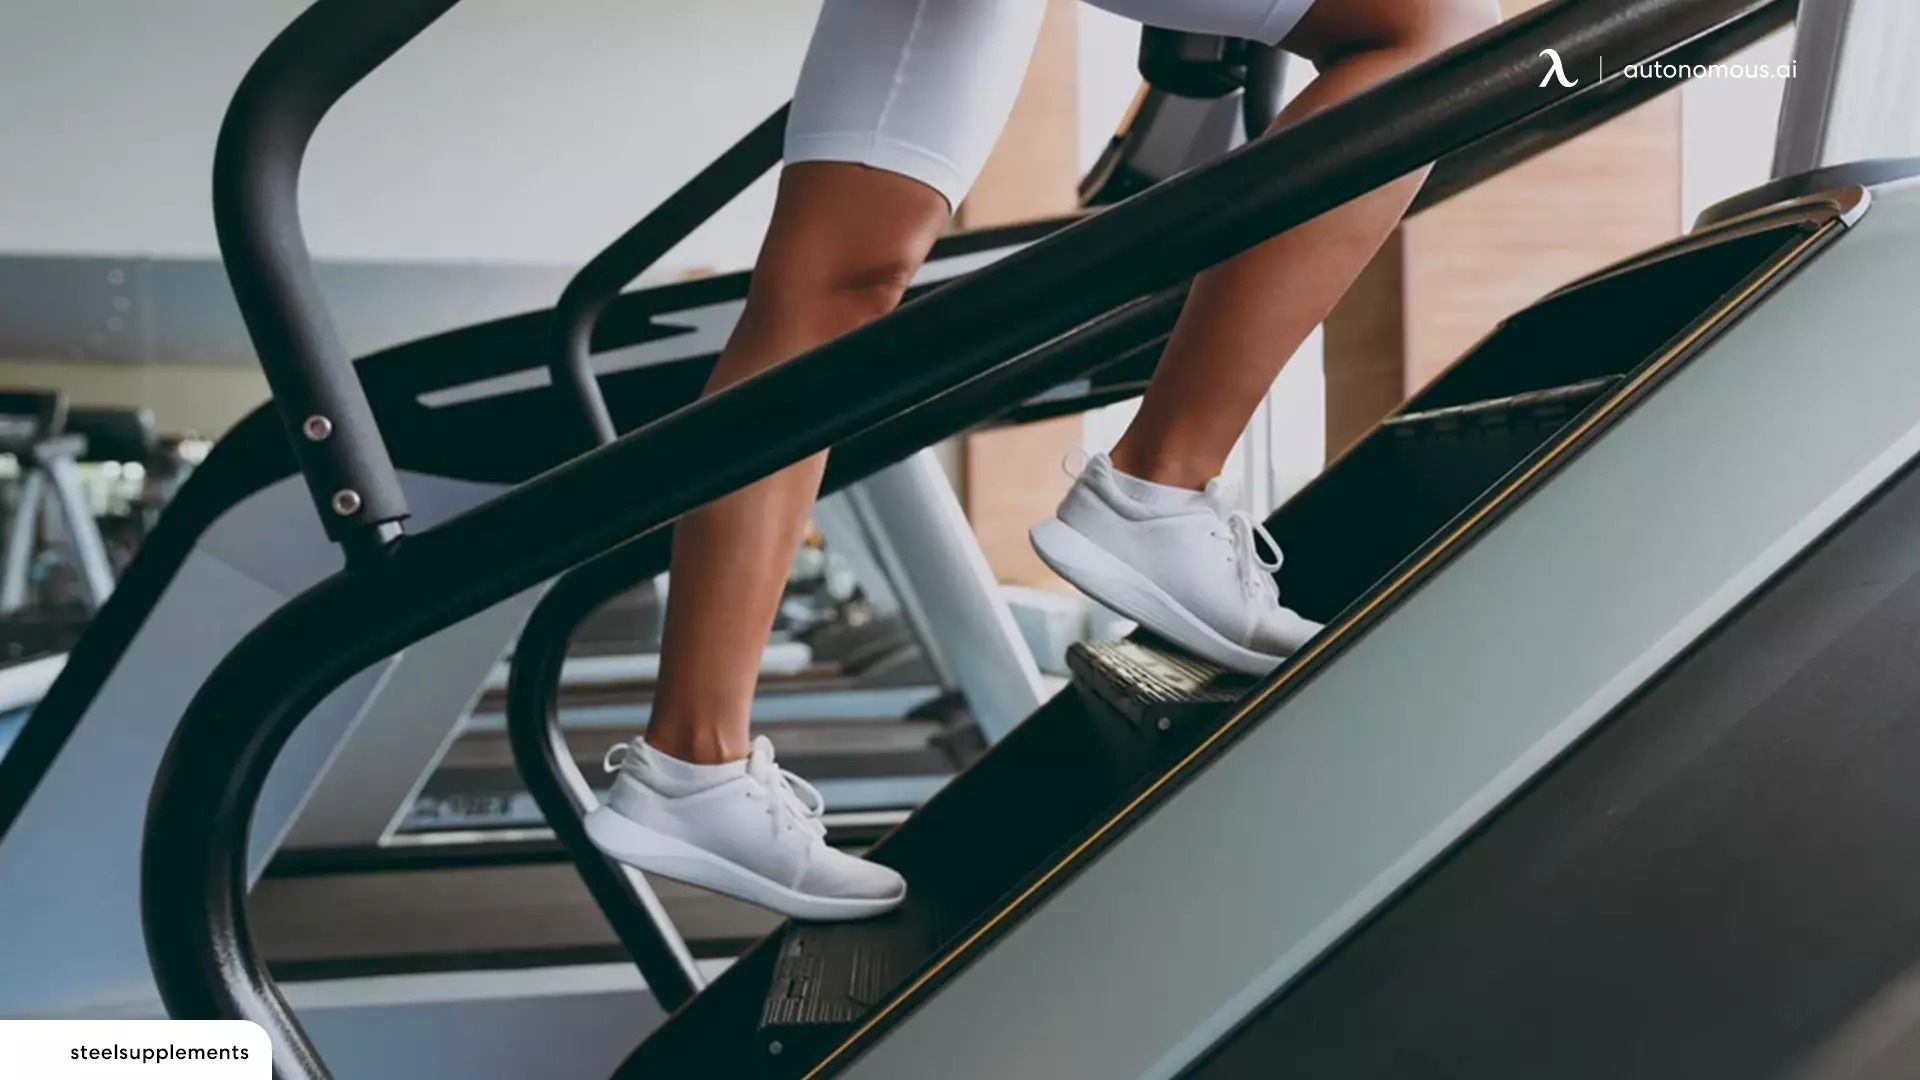 Pros and Cons of Stairmaster Machines